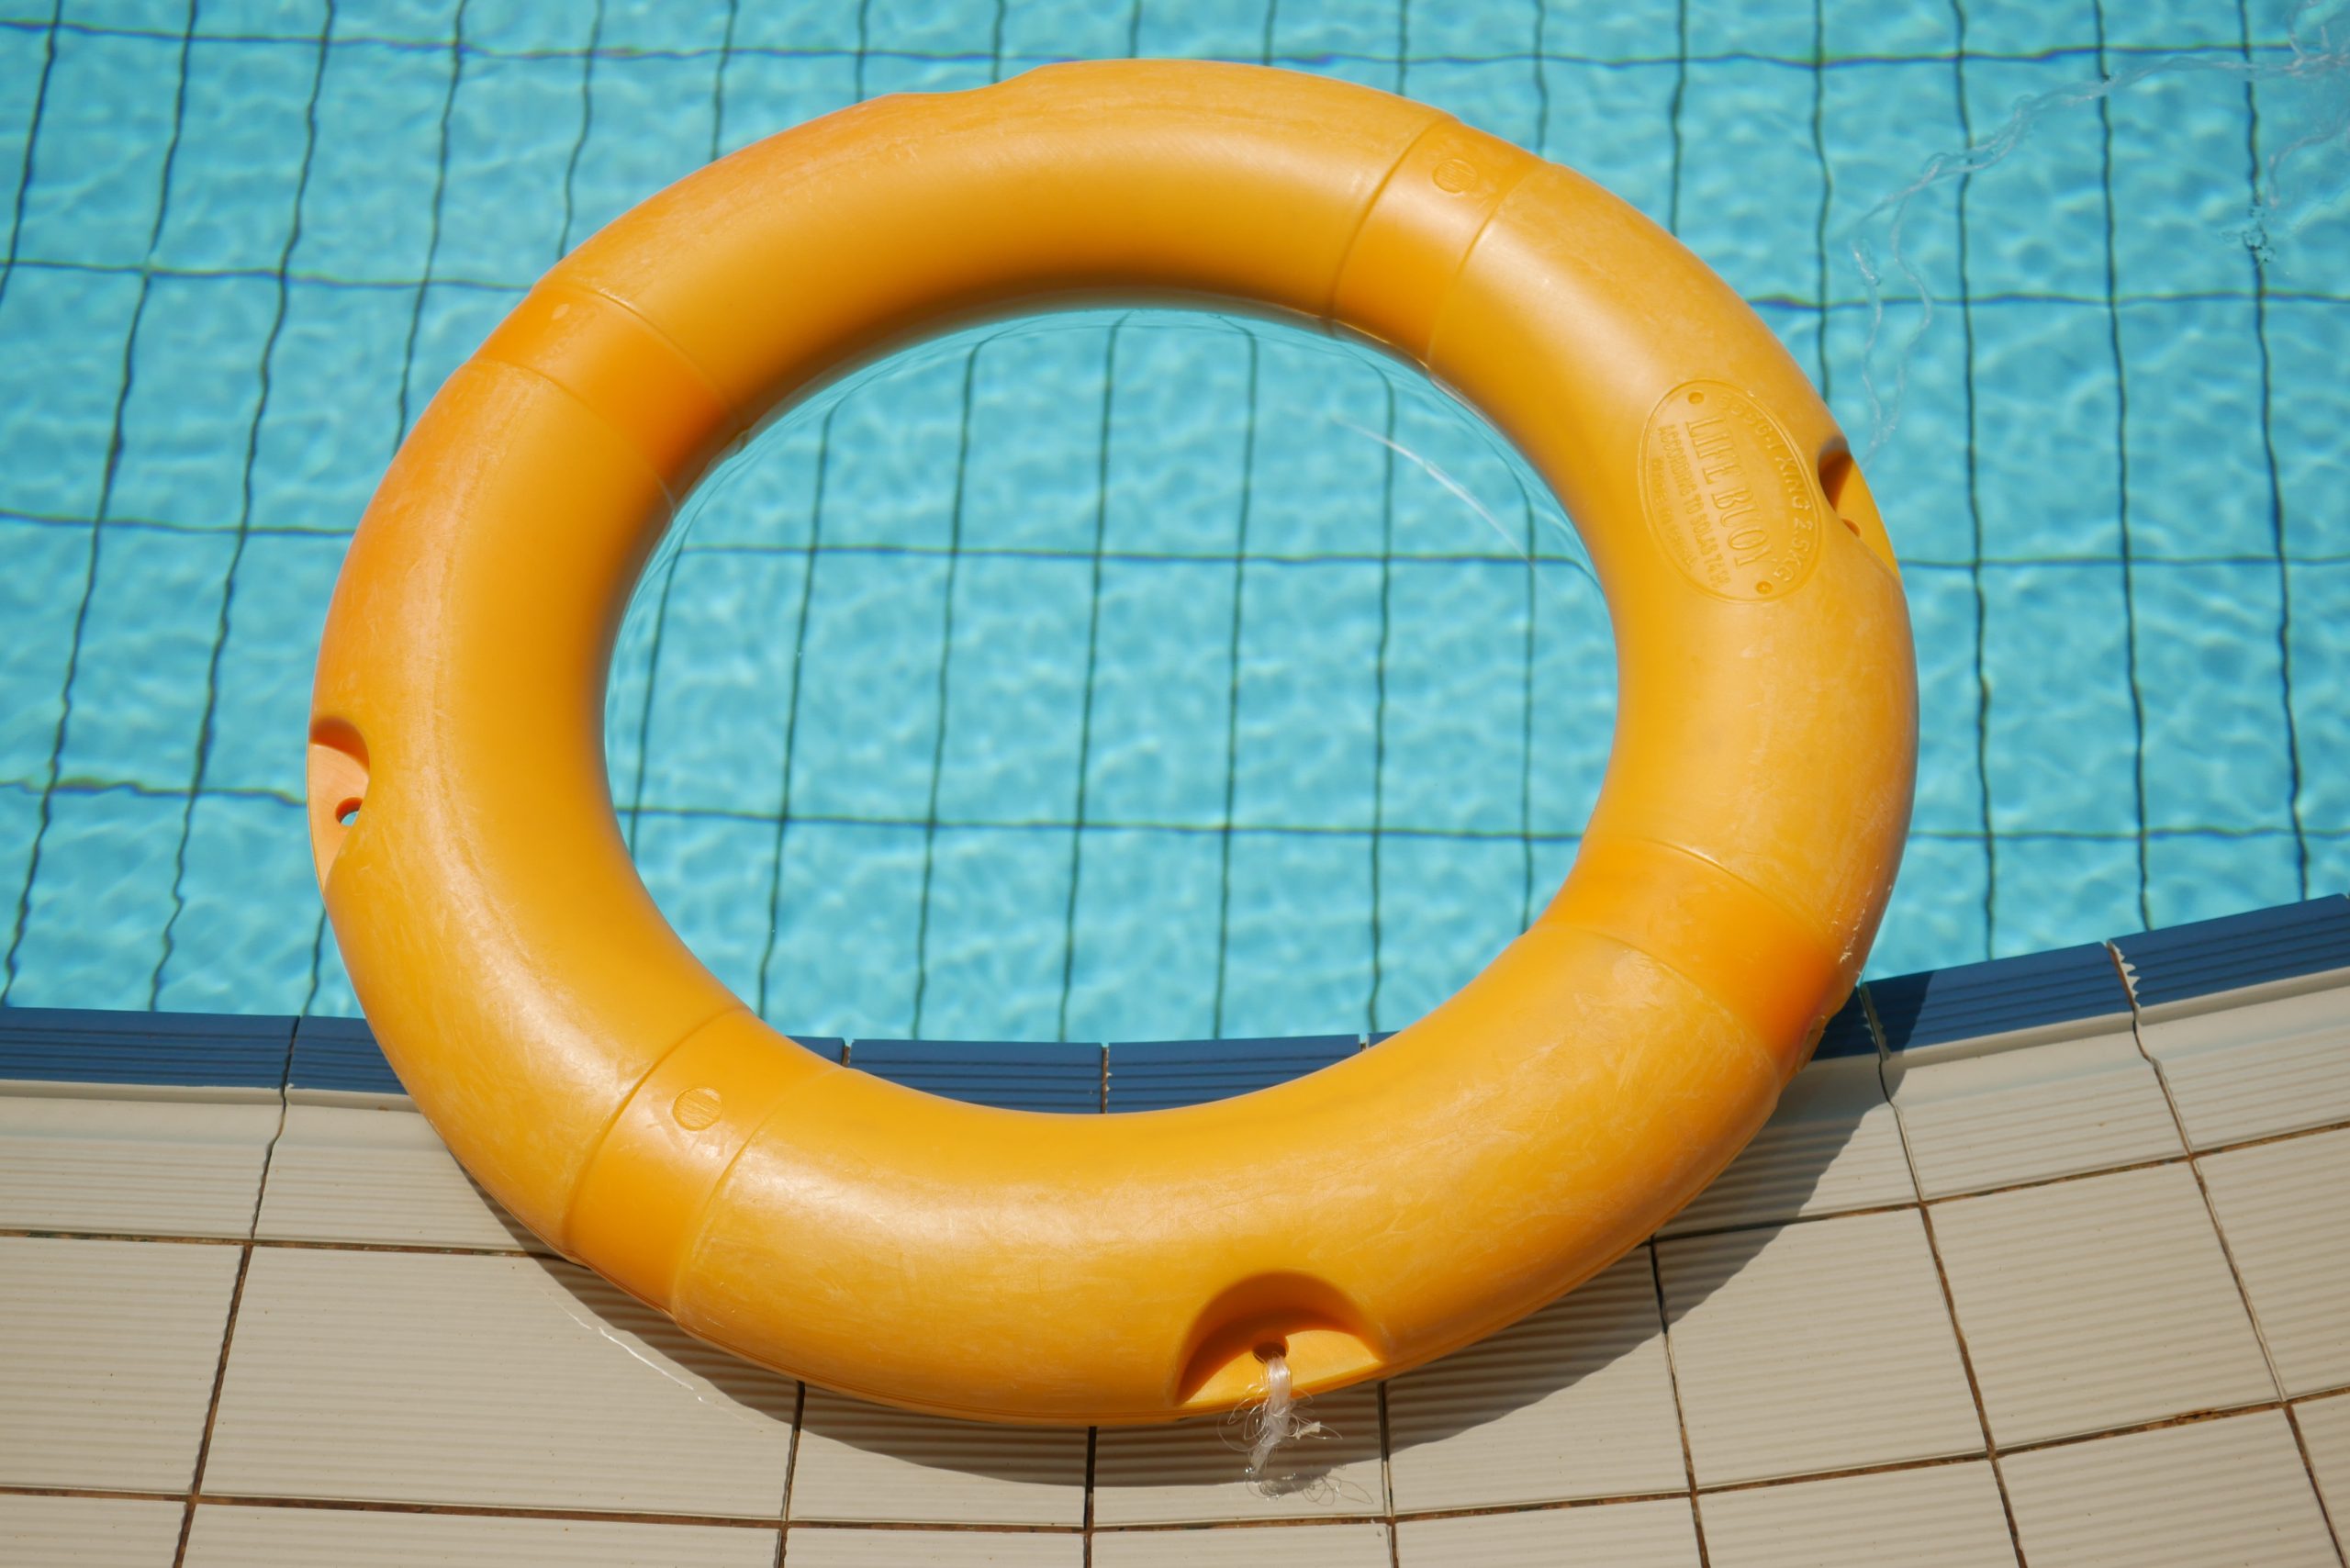 Red life buoy in swimming pool.